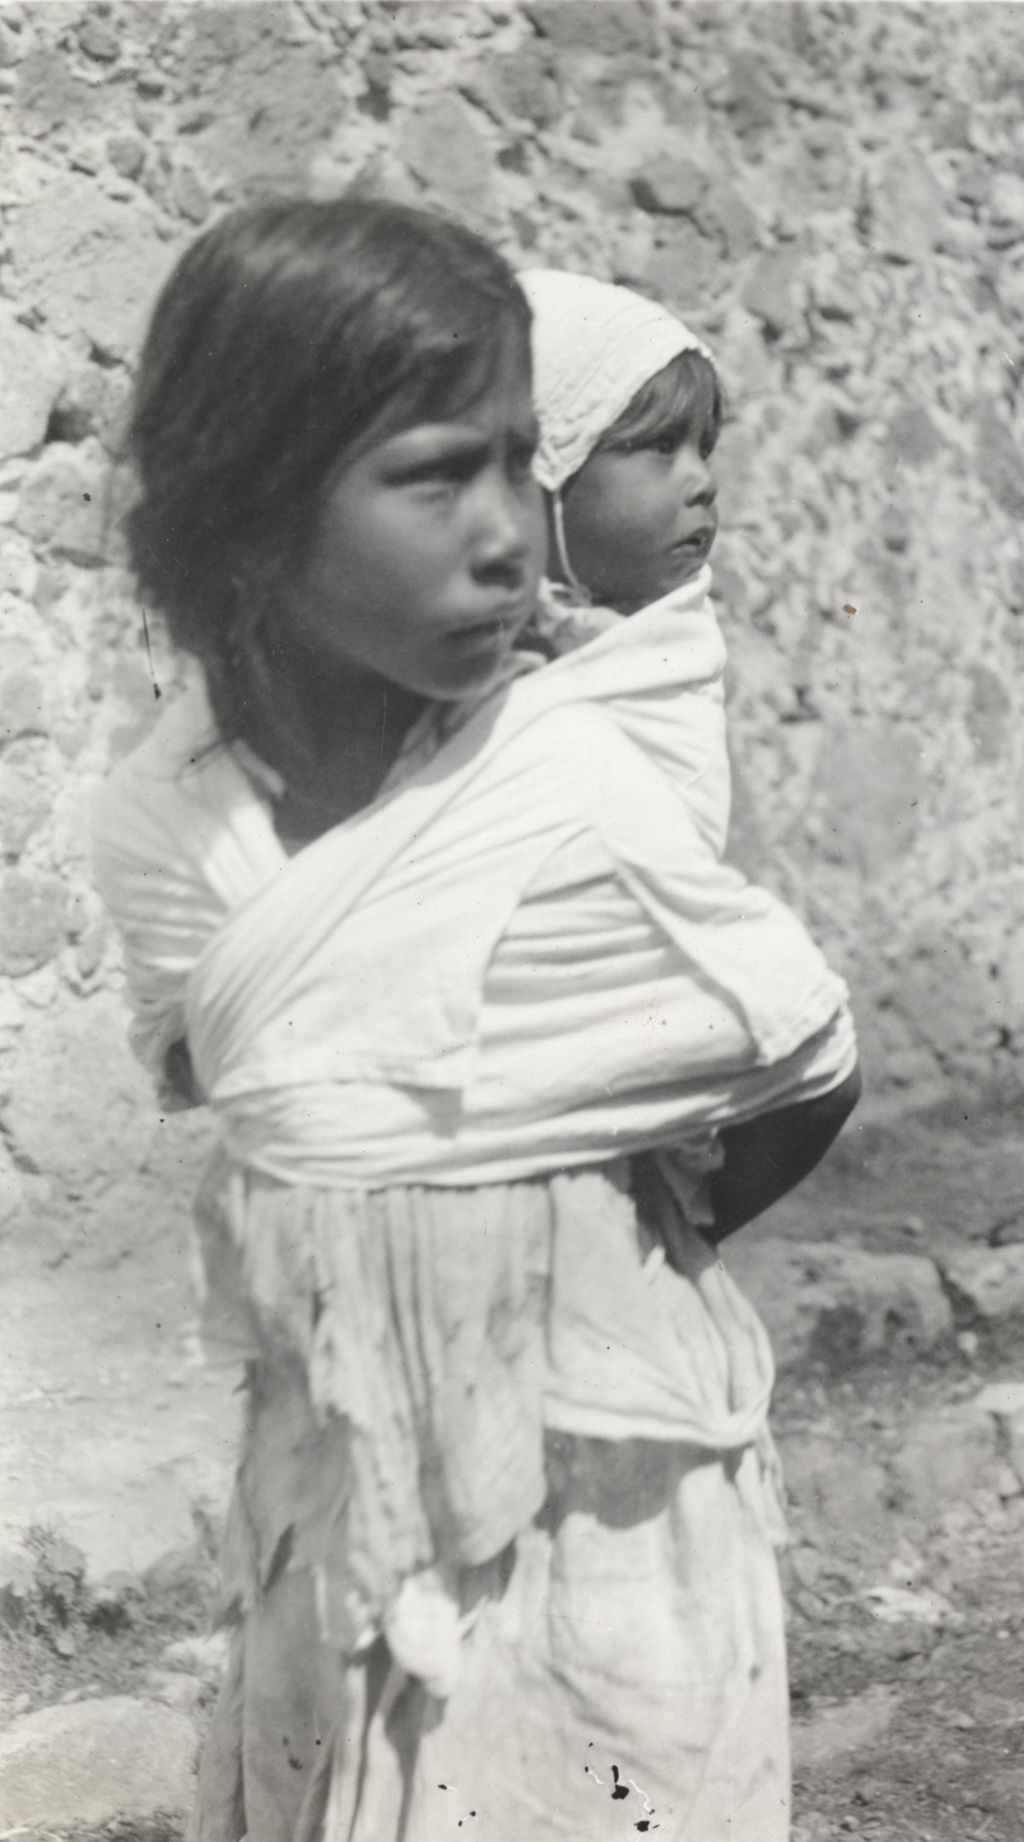 Small girl with infant photographed on Jane Addams' trip to Mexico